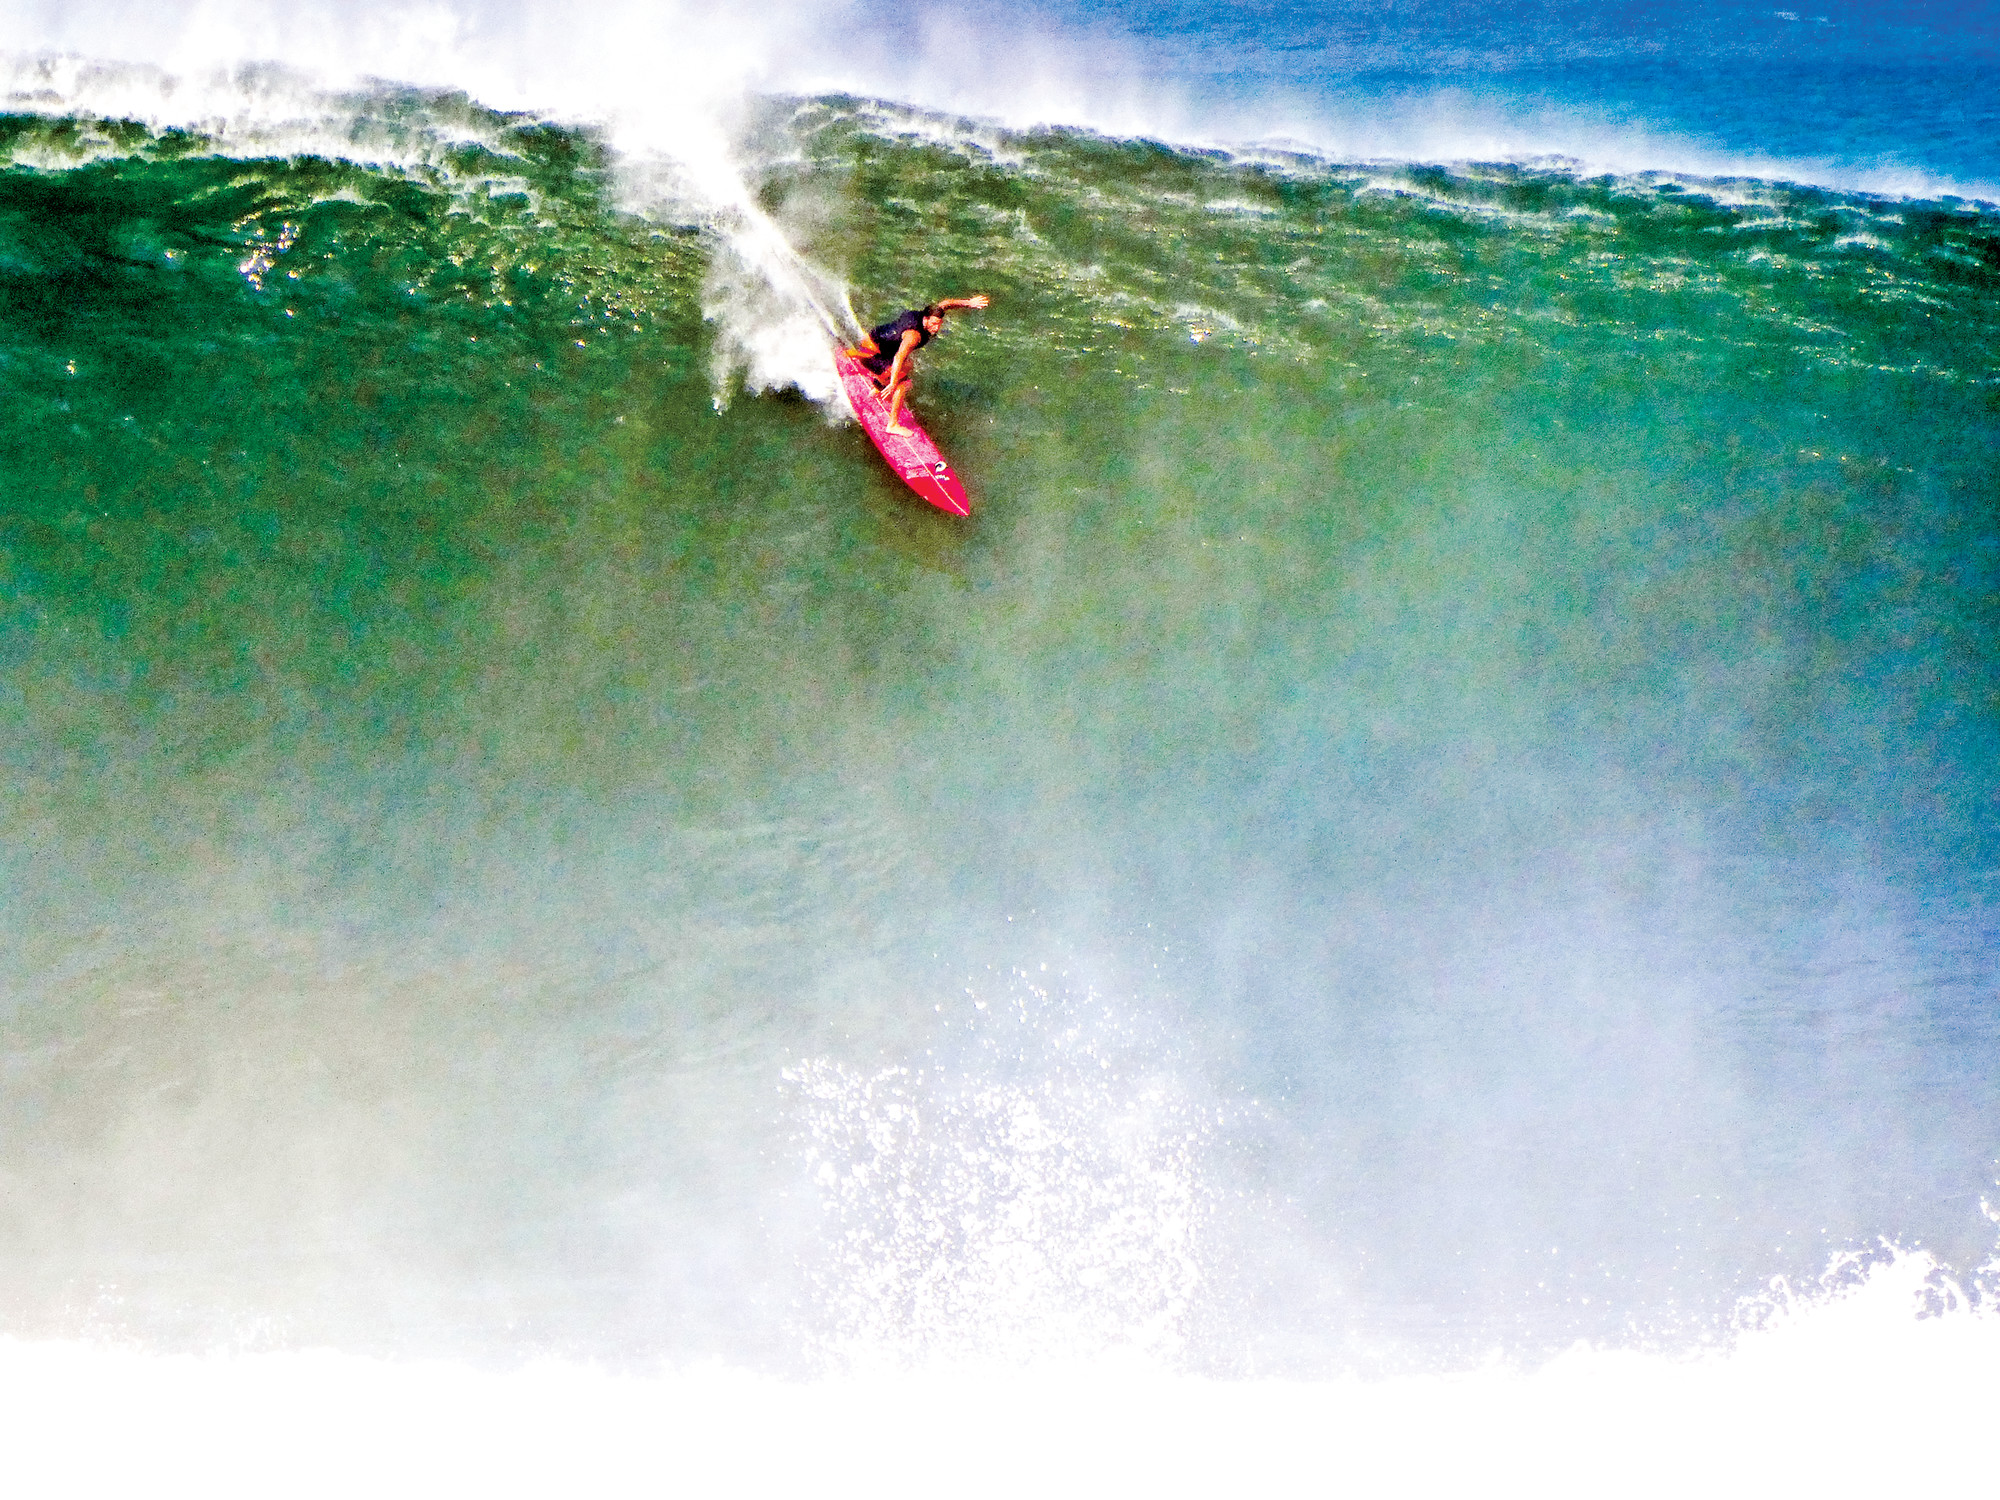 Courtesy Benjamin DeCamp
Professional big-wave surfer Will Skudin rode one of the biggest waves of his life in Mexico — estimated to be 60 feet high.